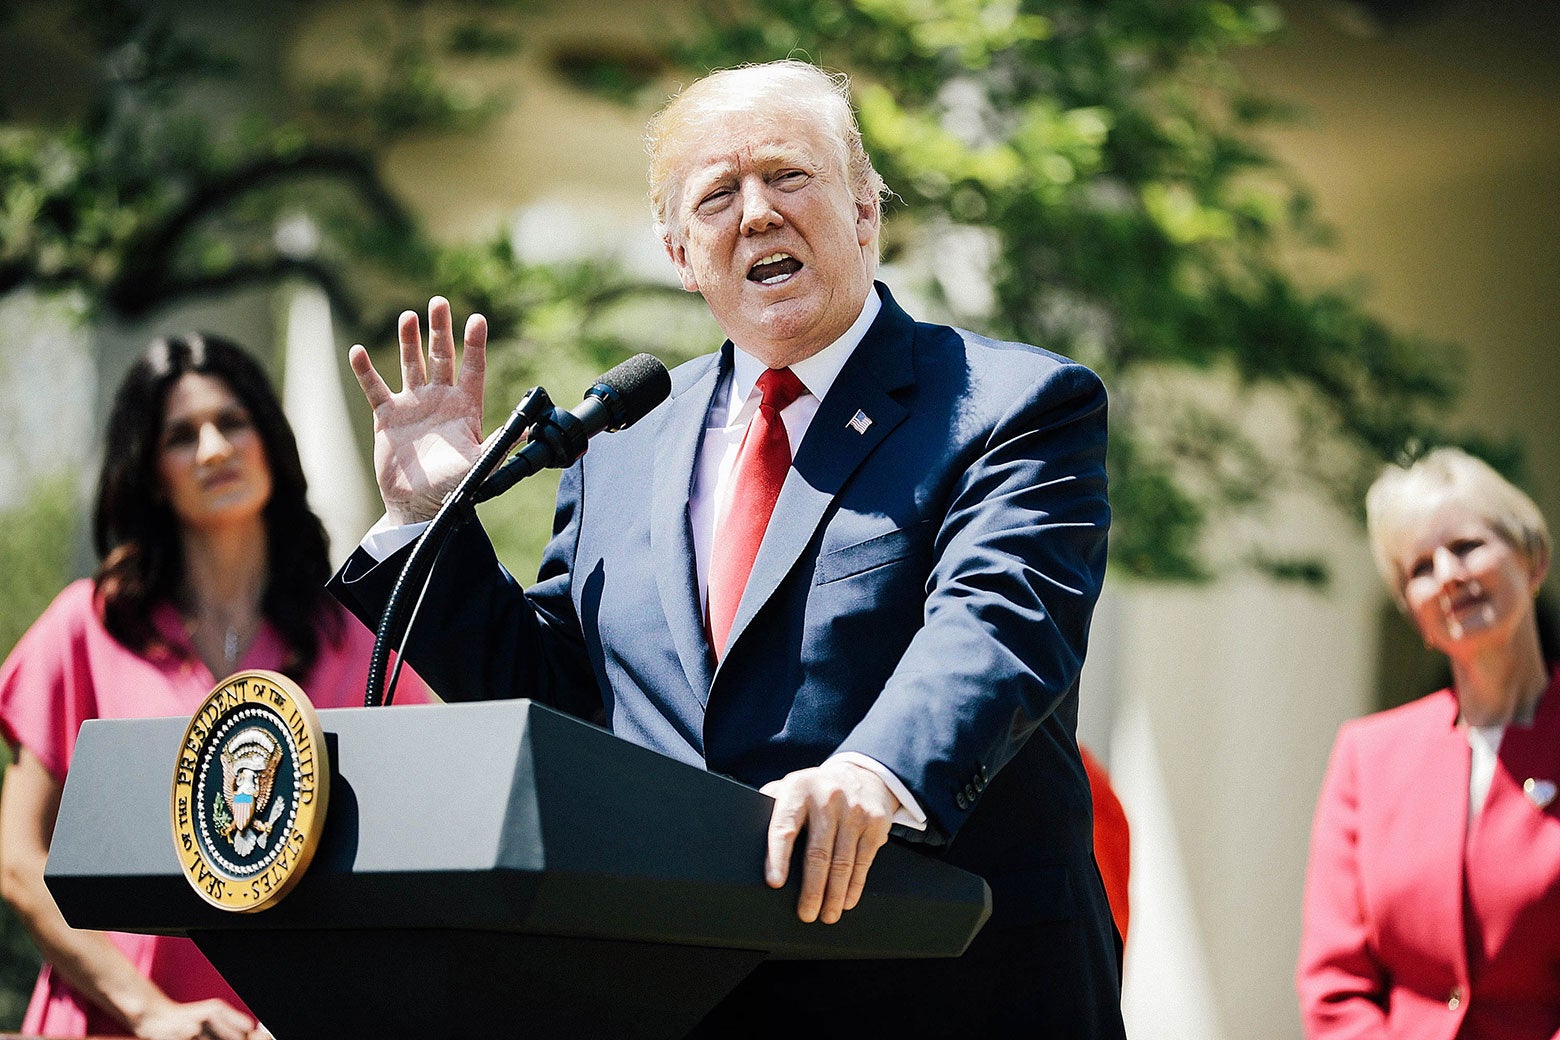 President Donald Trump delivers remarks during an event to mark the National Day of Prayer in the Rose Garden at the White House Thursday in Washington.